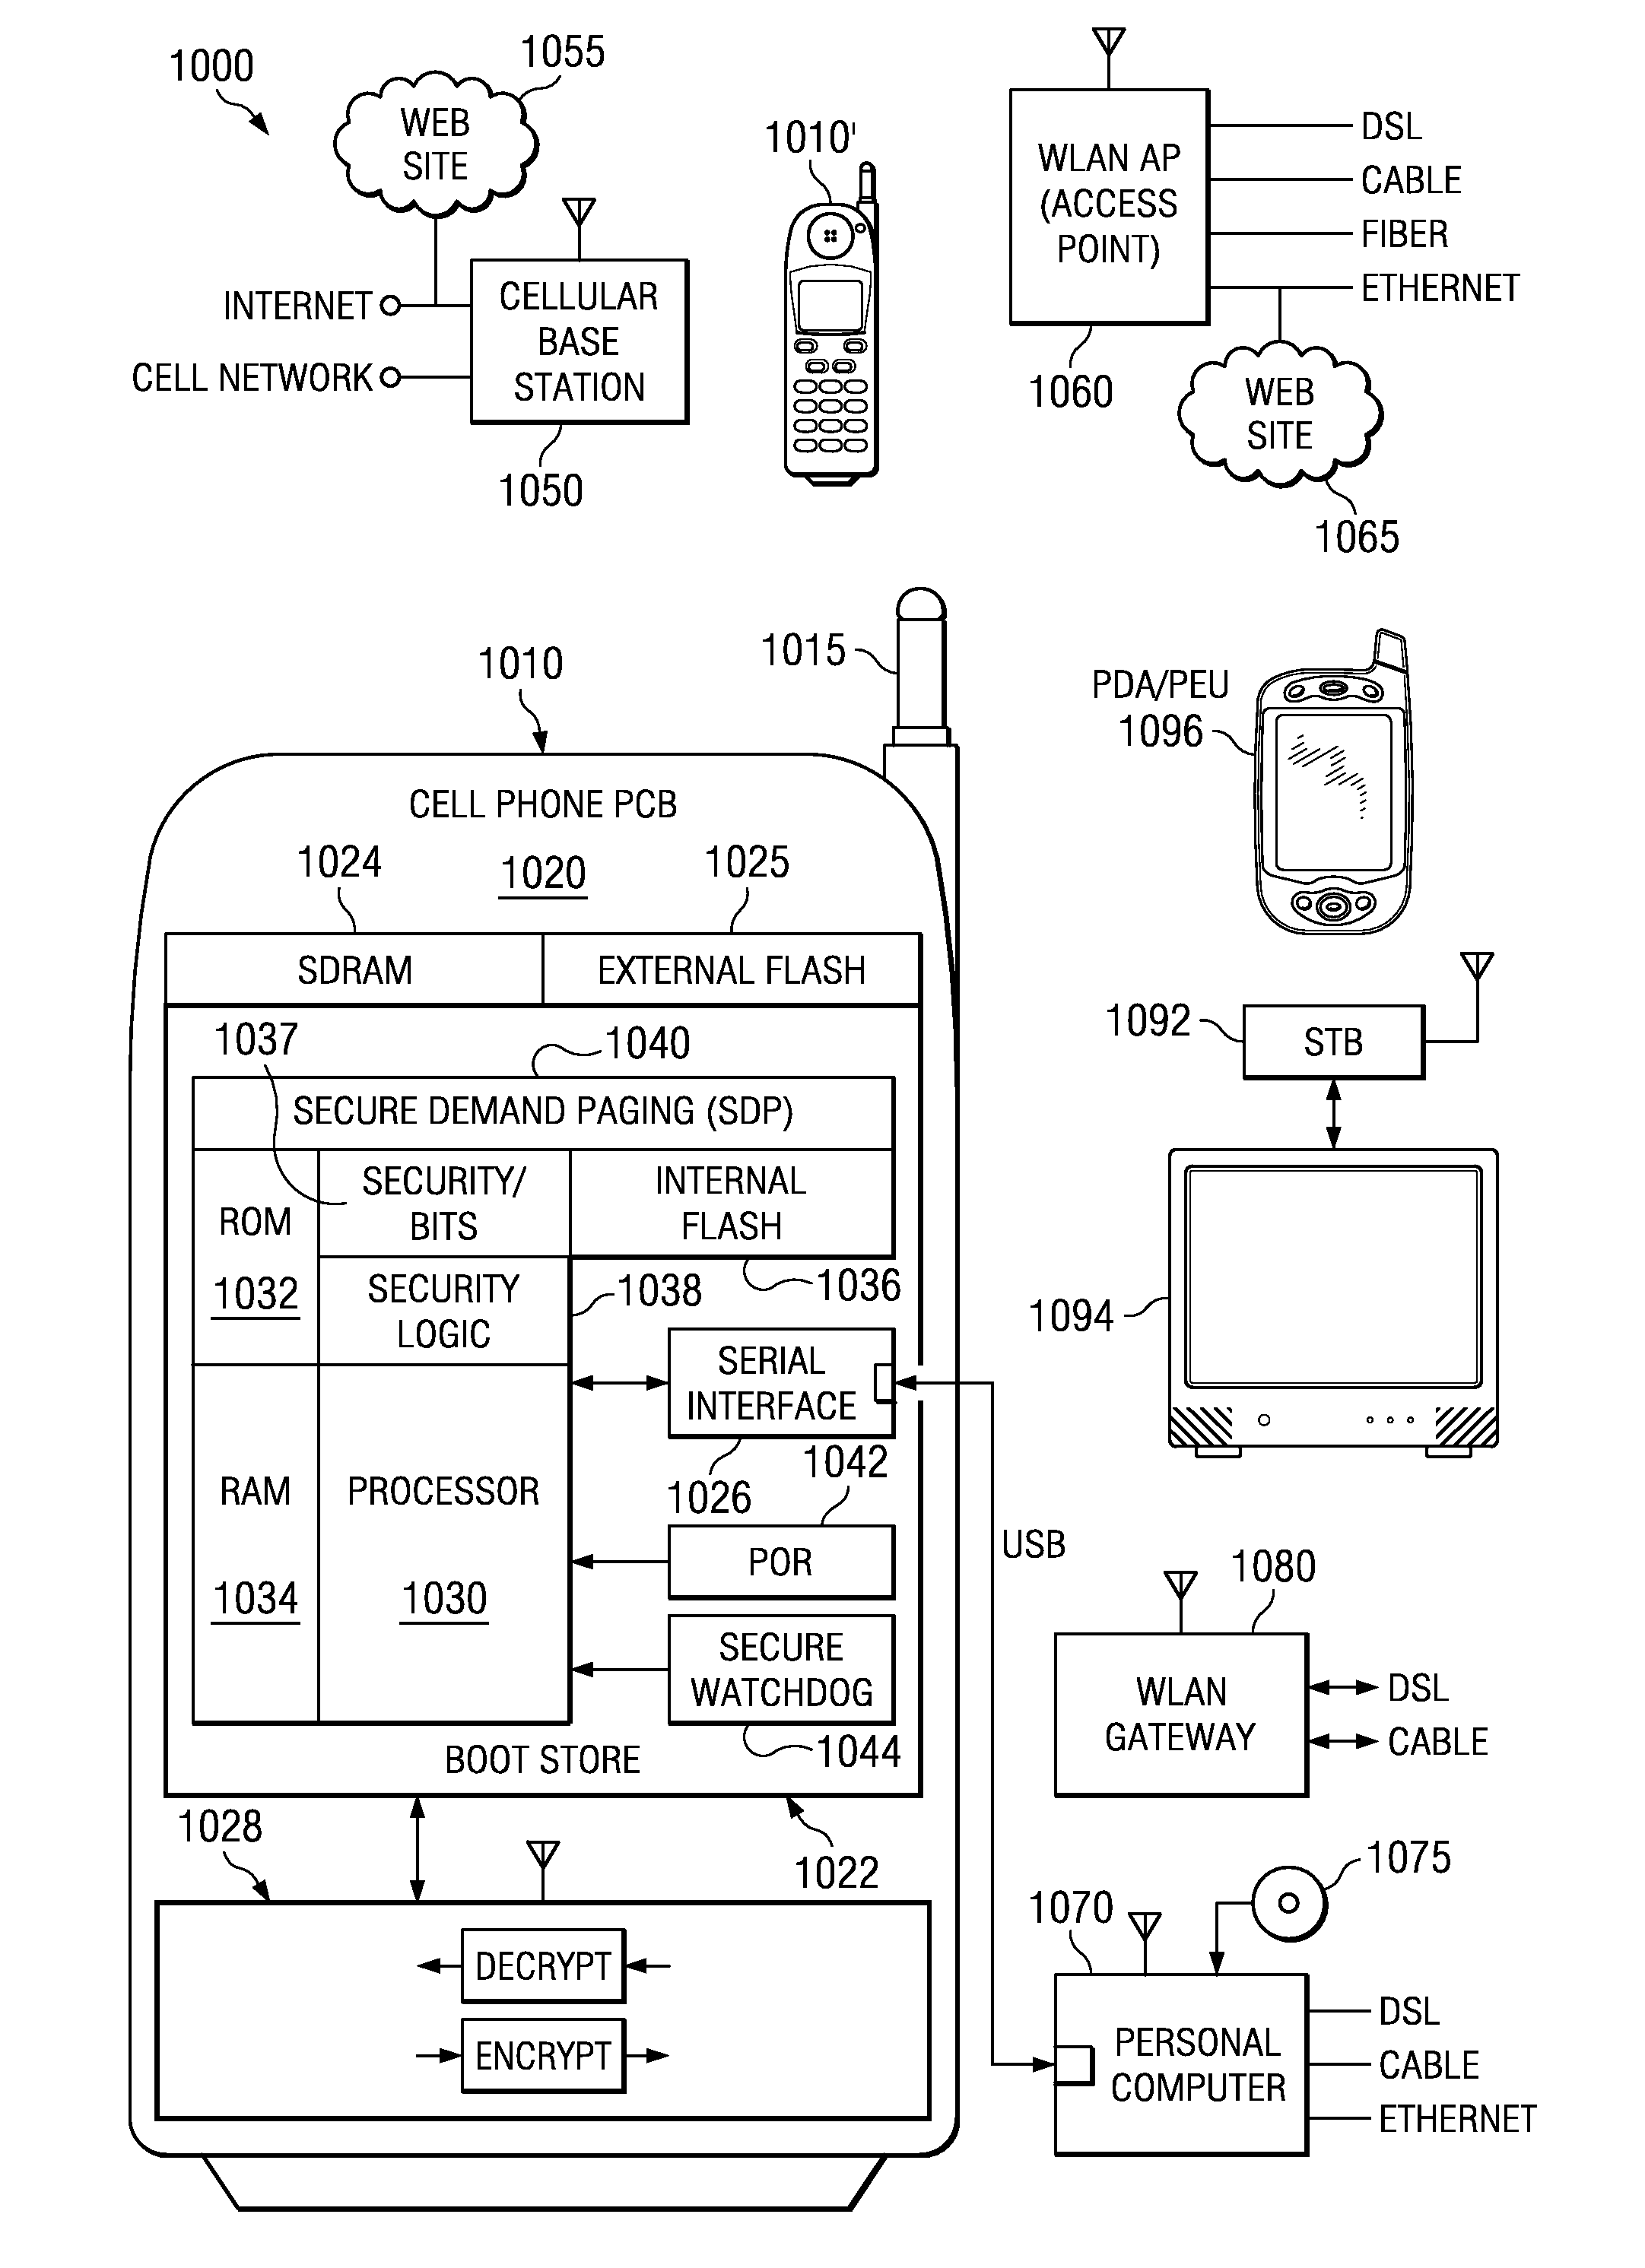 Virtual cores and hardware-supported hypervisor integrated circuits, systems, methods and processes of manufacture